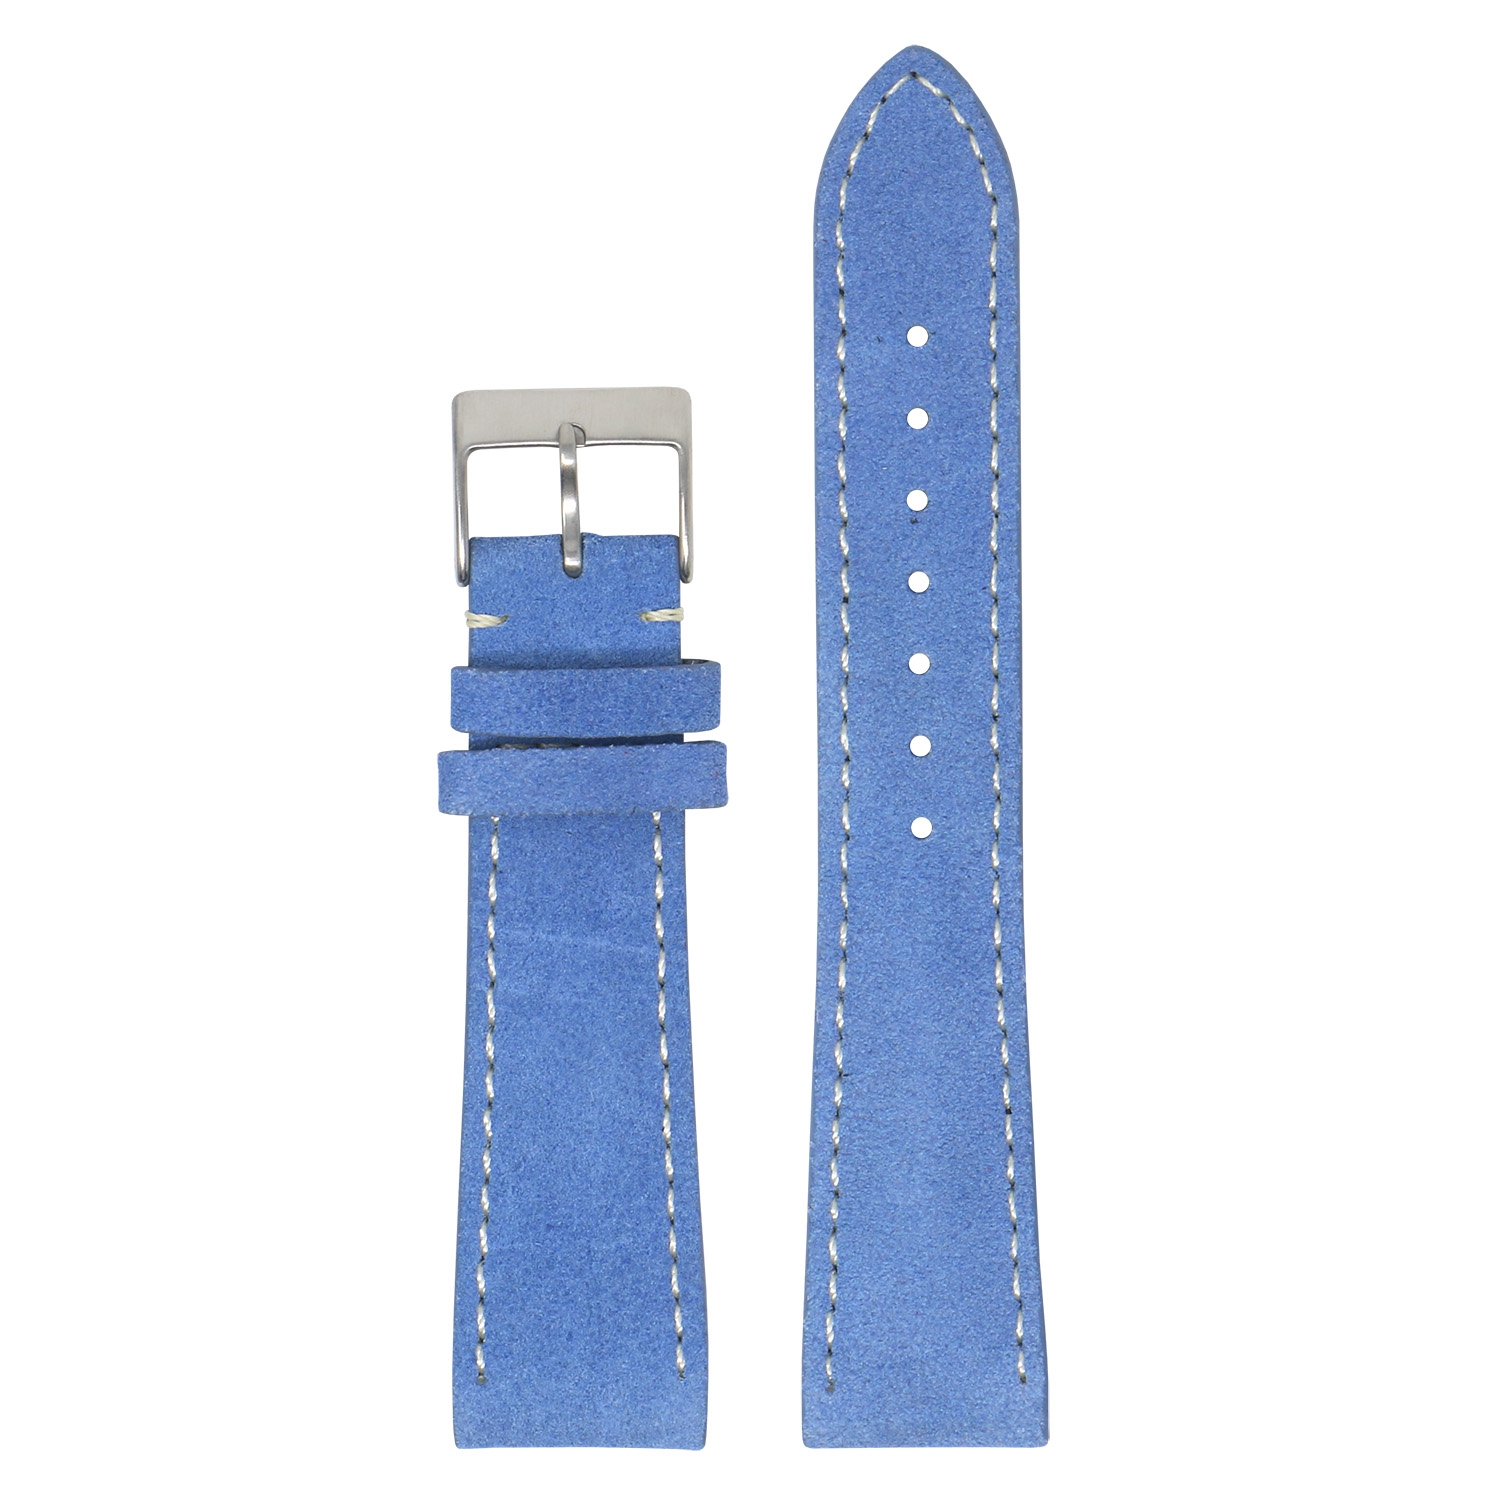 StrapsCo Classic Suede Watch Band Strap (Short, Standard, Long) for Fitbit Charge 4 & Charge 3 - Standard - Light Blue